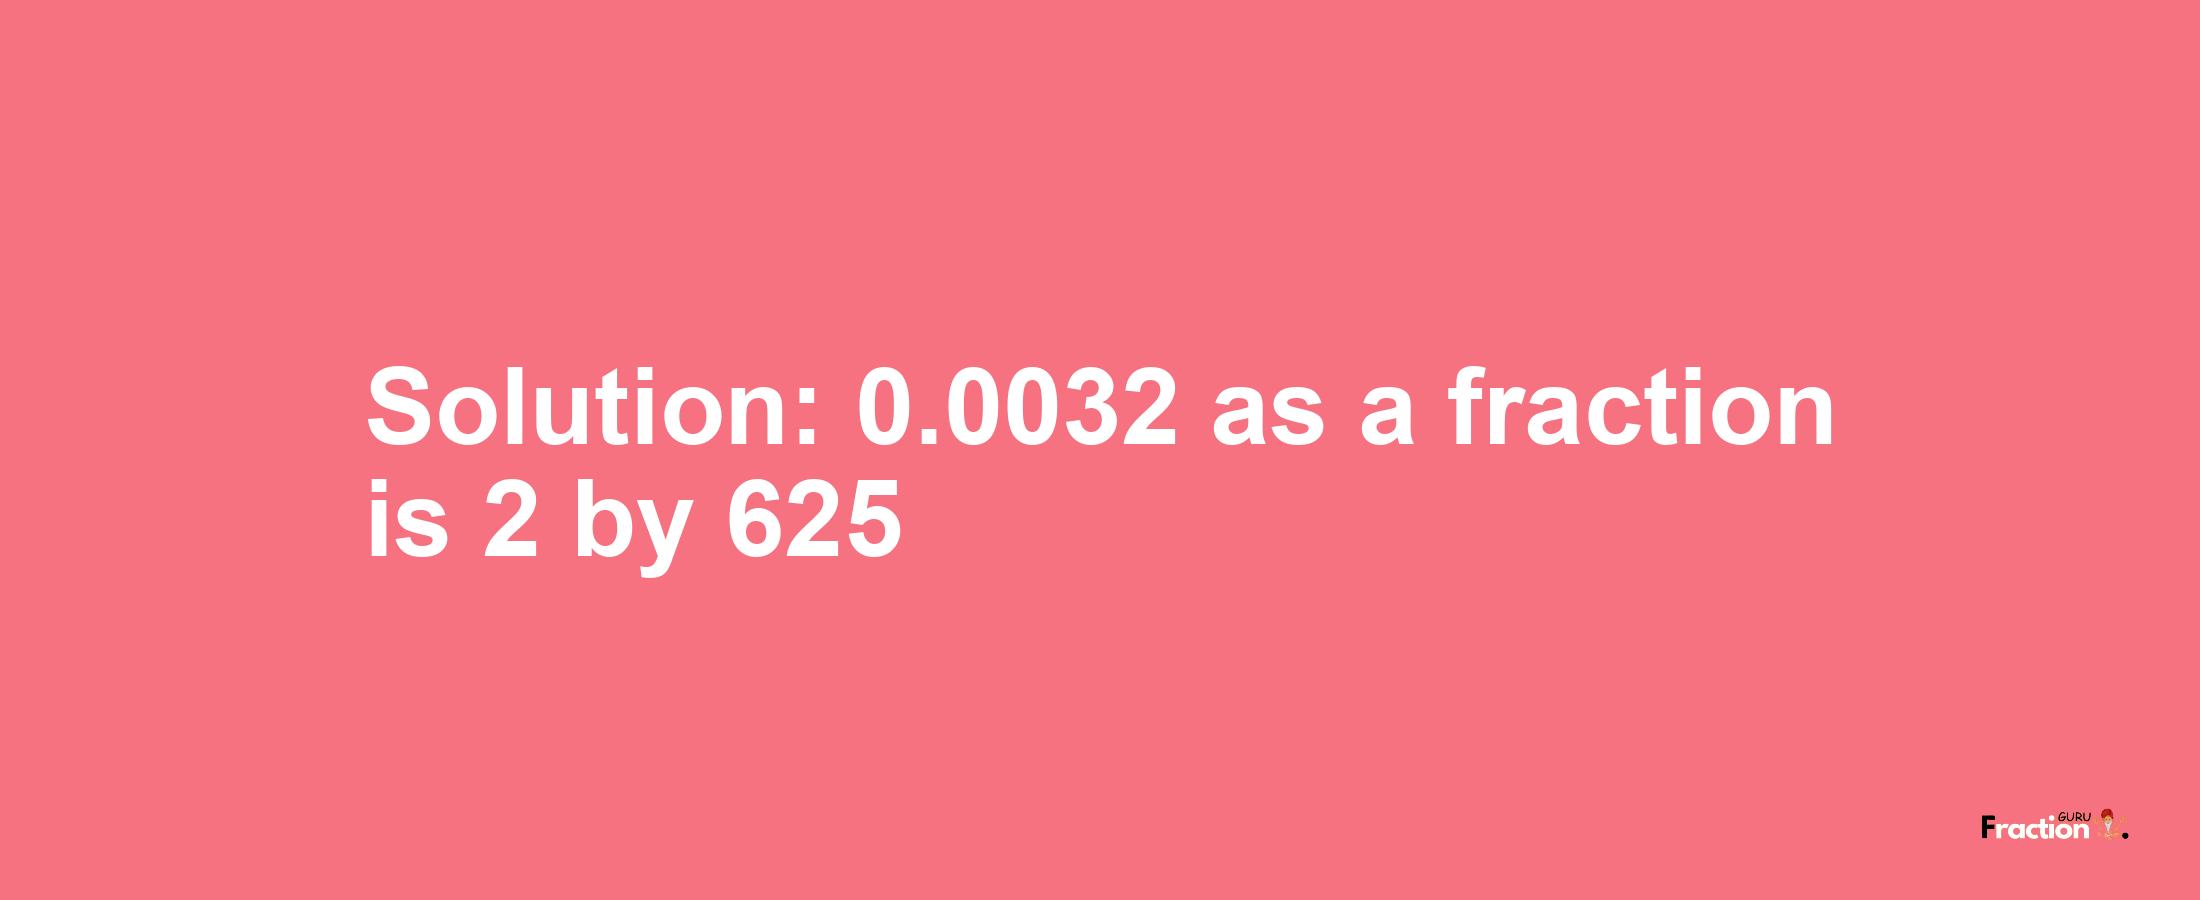 Solution:0.0032 as a fraction is 2/625